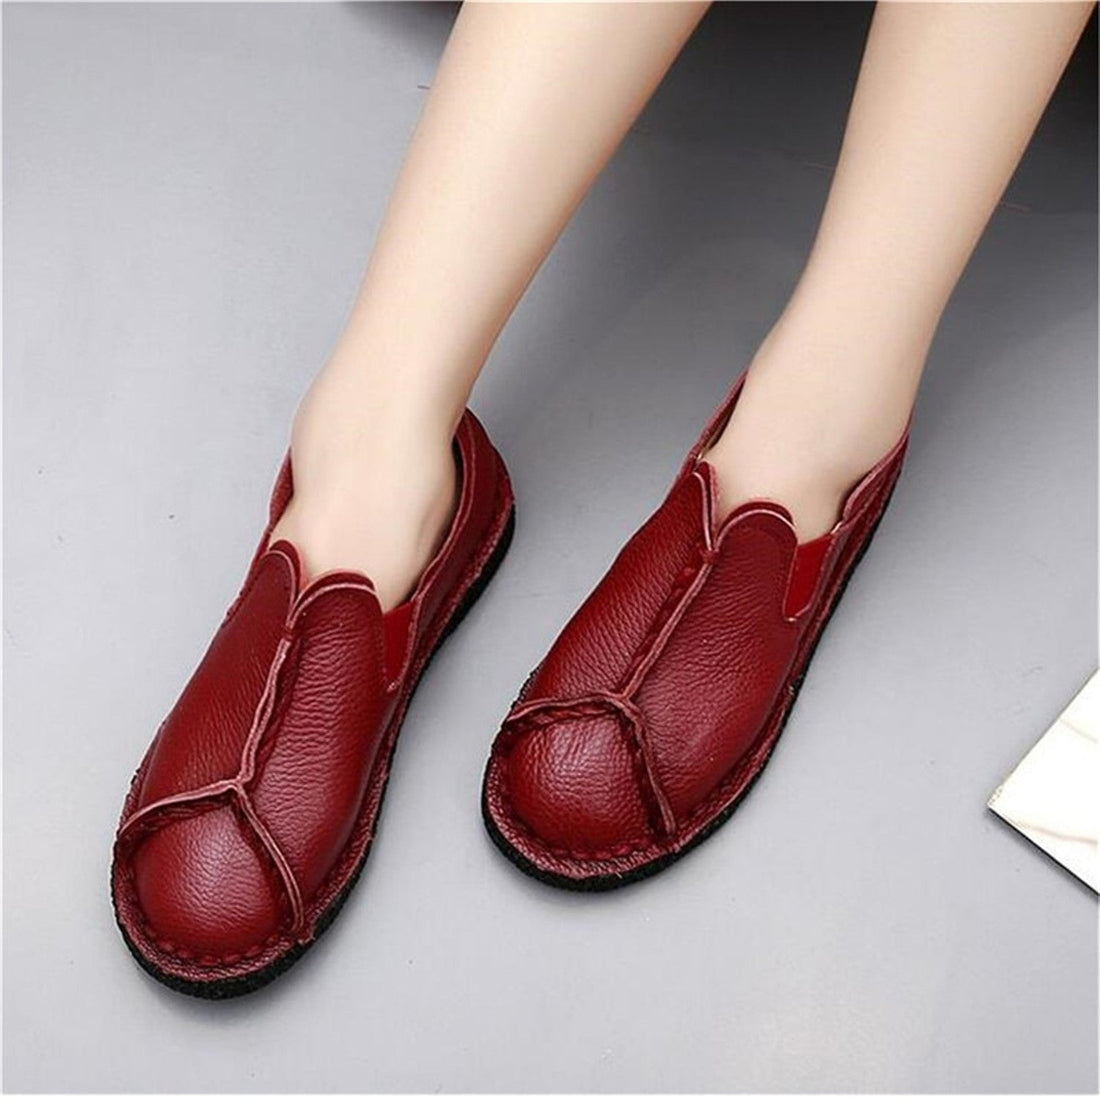 Women's Spring/Autumn Casual Genuine Leather Loafers